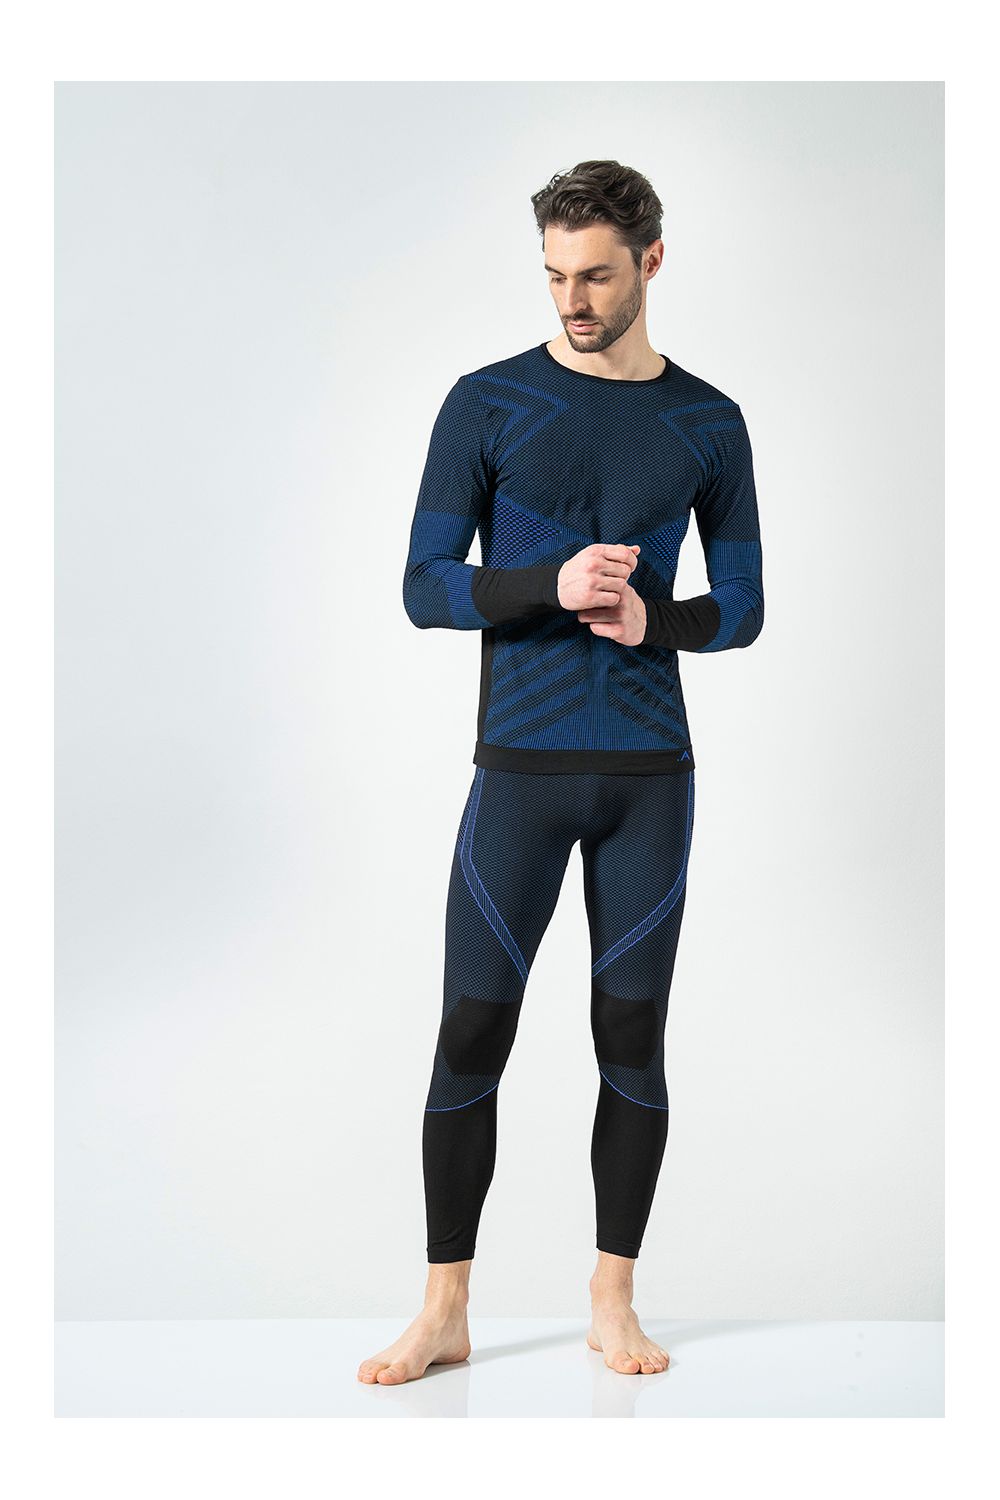 Men's Long Sleeve Top: Breathable, Energy  Thermoregulating.